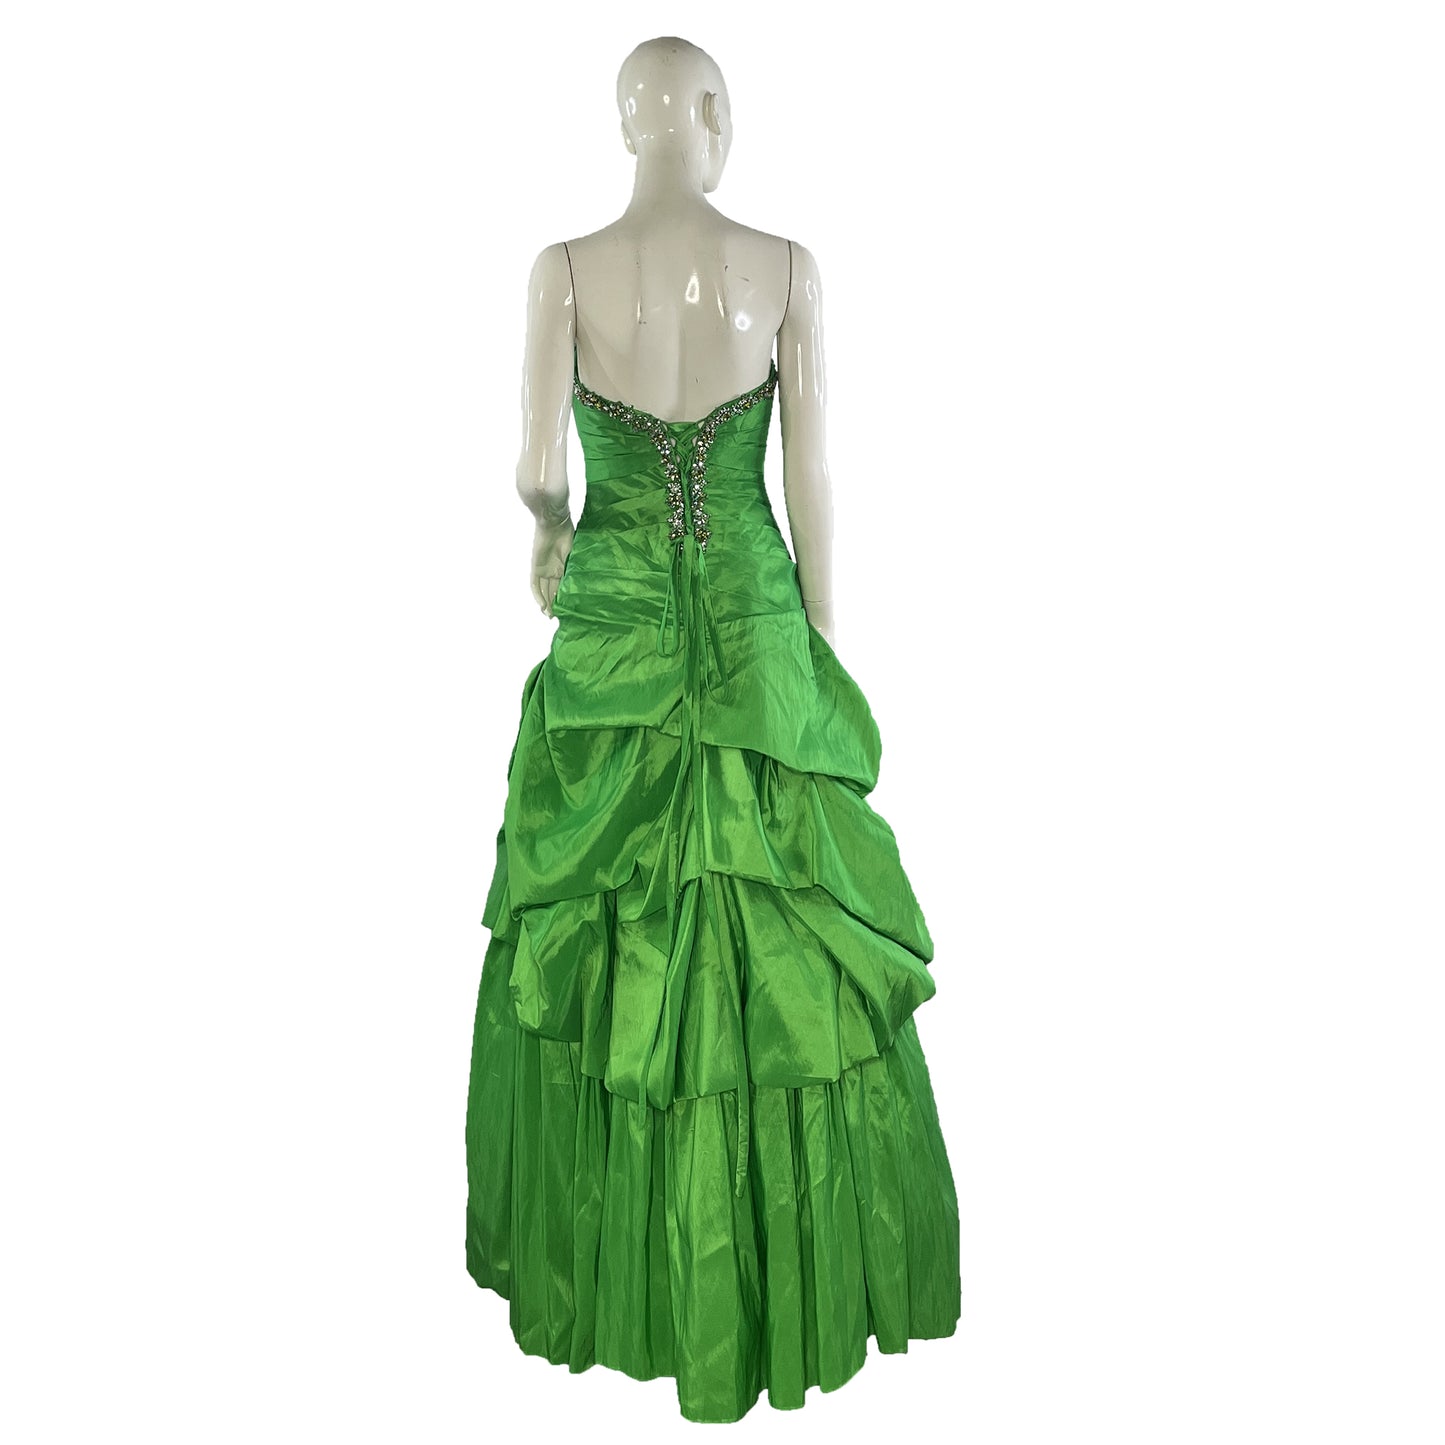 Alyce Designs Strapless Embellished Ball Gown Green Size 8 SKU 000406-1